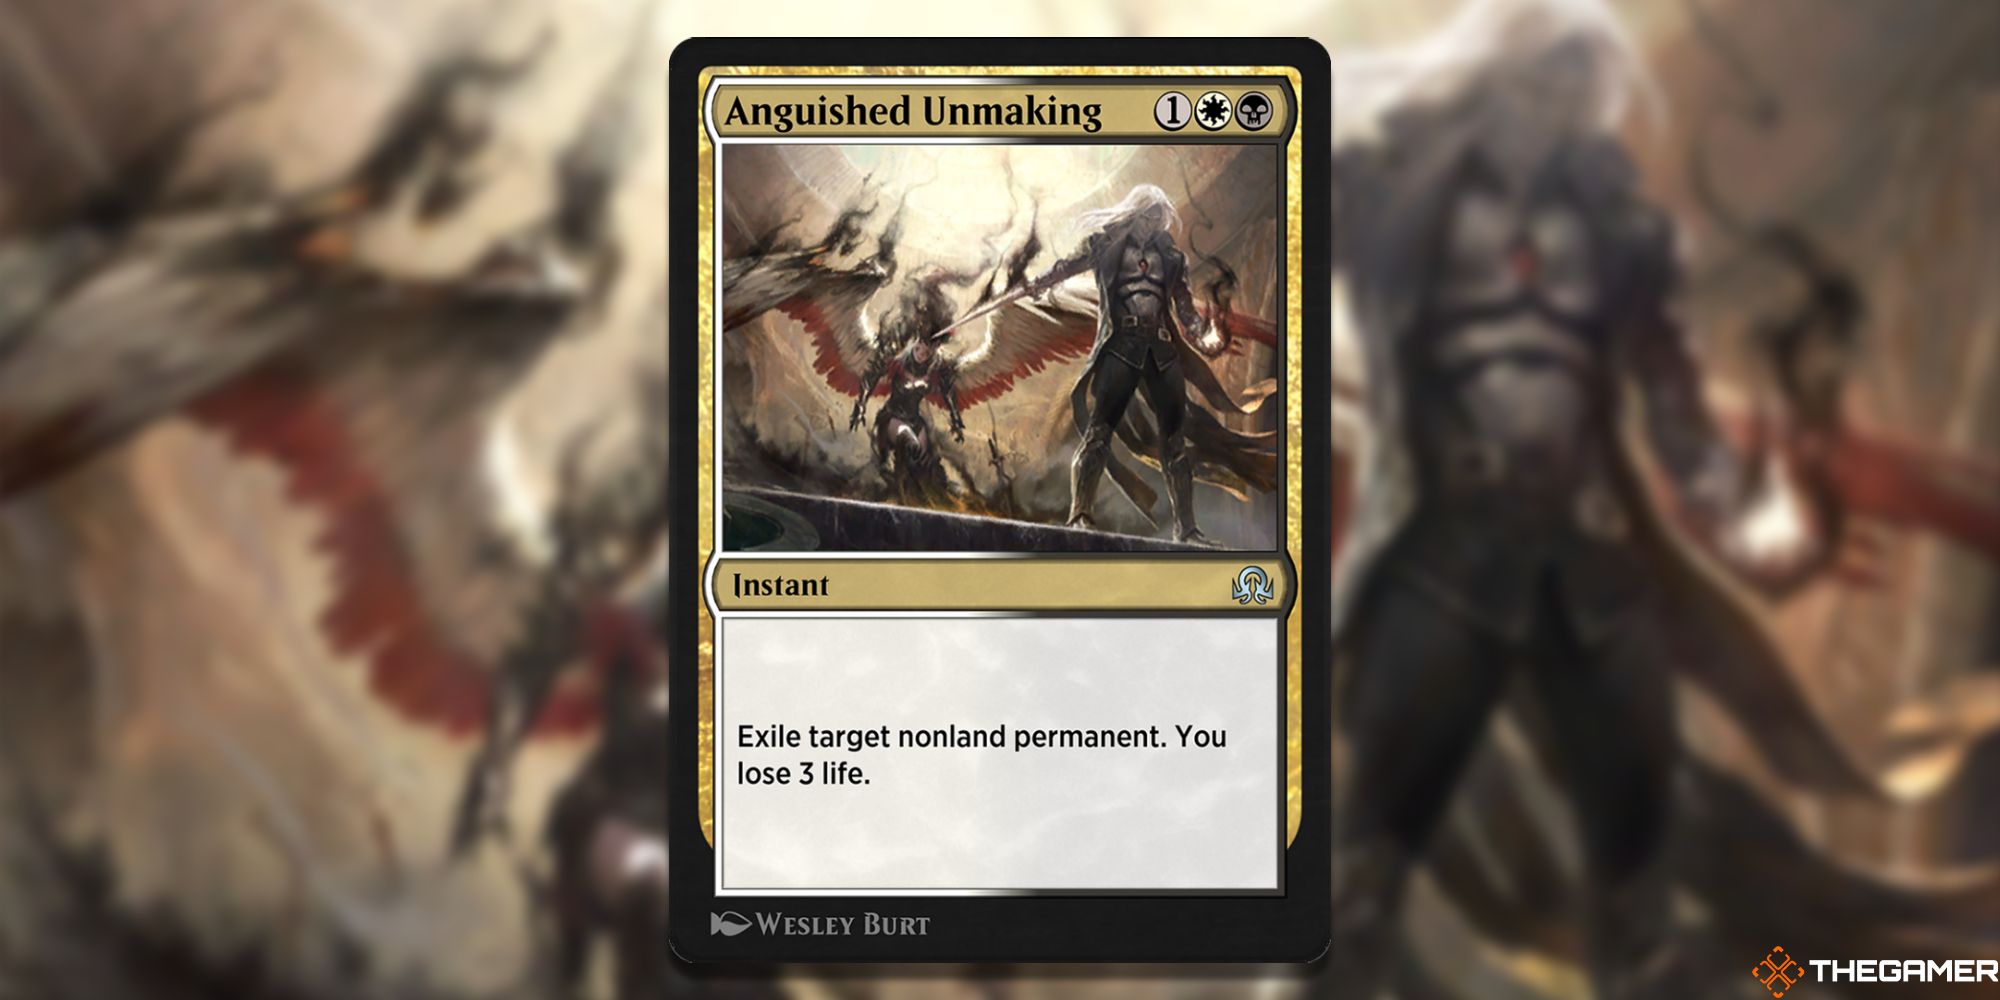 Image of the Anguished Unmaking card in Magic: The Gathering, with art by Wesly Burt